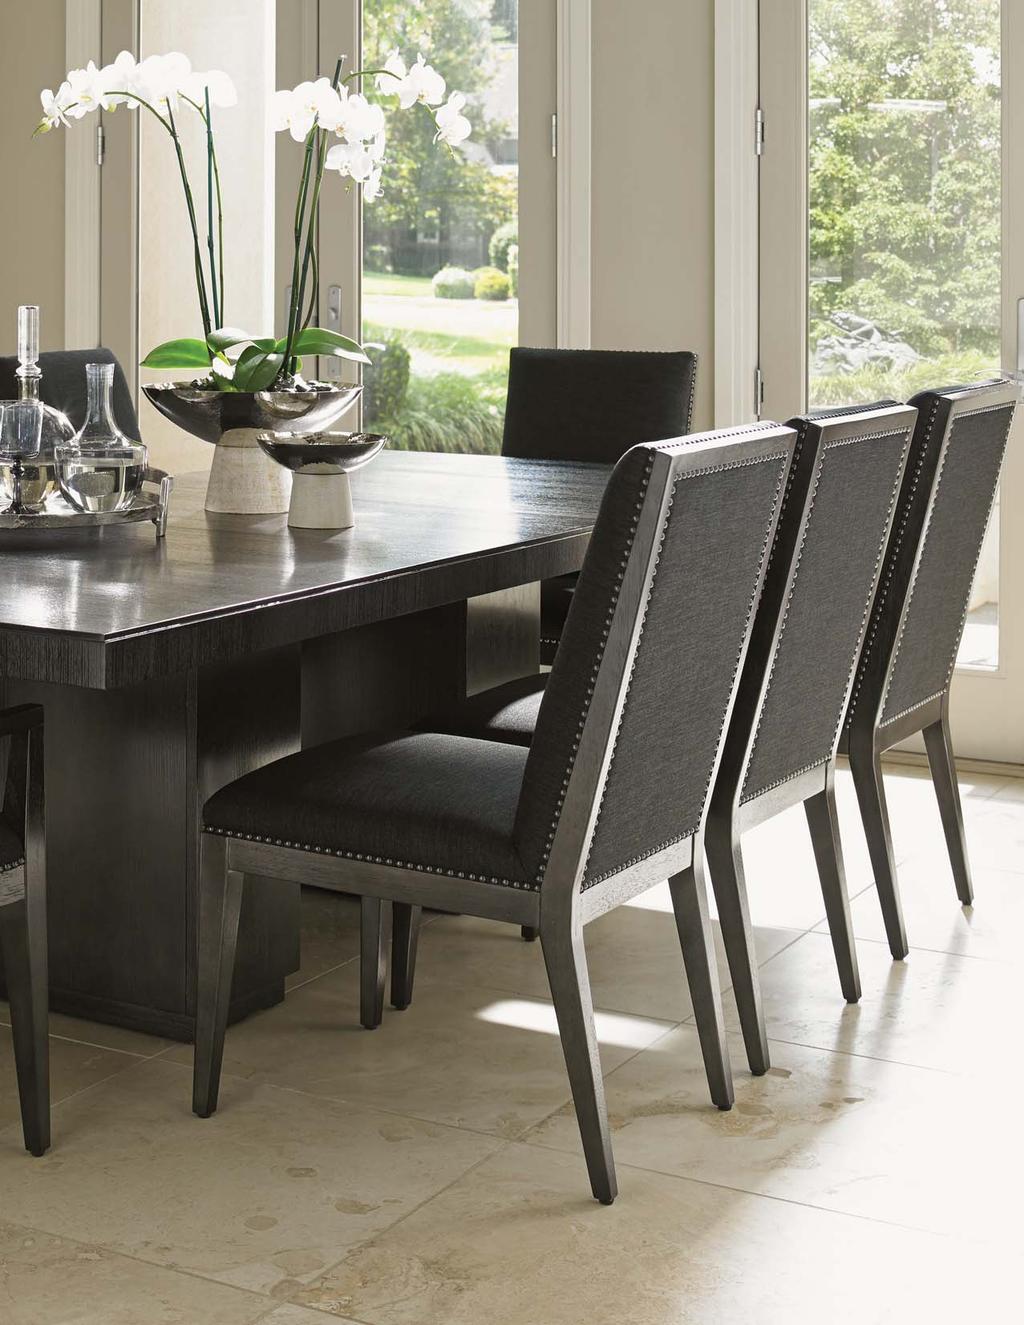 The Gray Mist fabric on the chairs features a soft linen weave, framed with nailhead trim for an elegant tailored look.